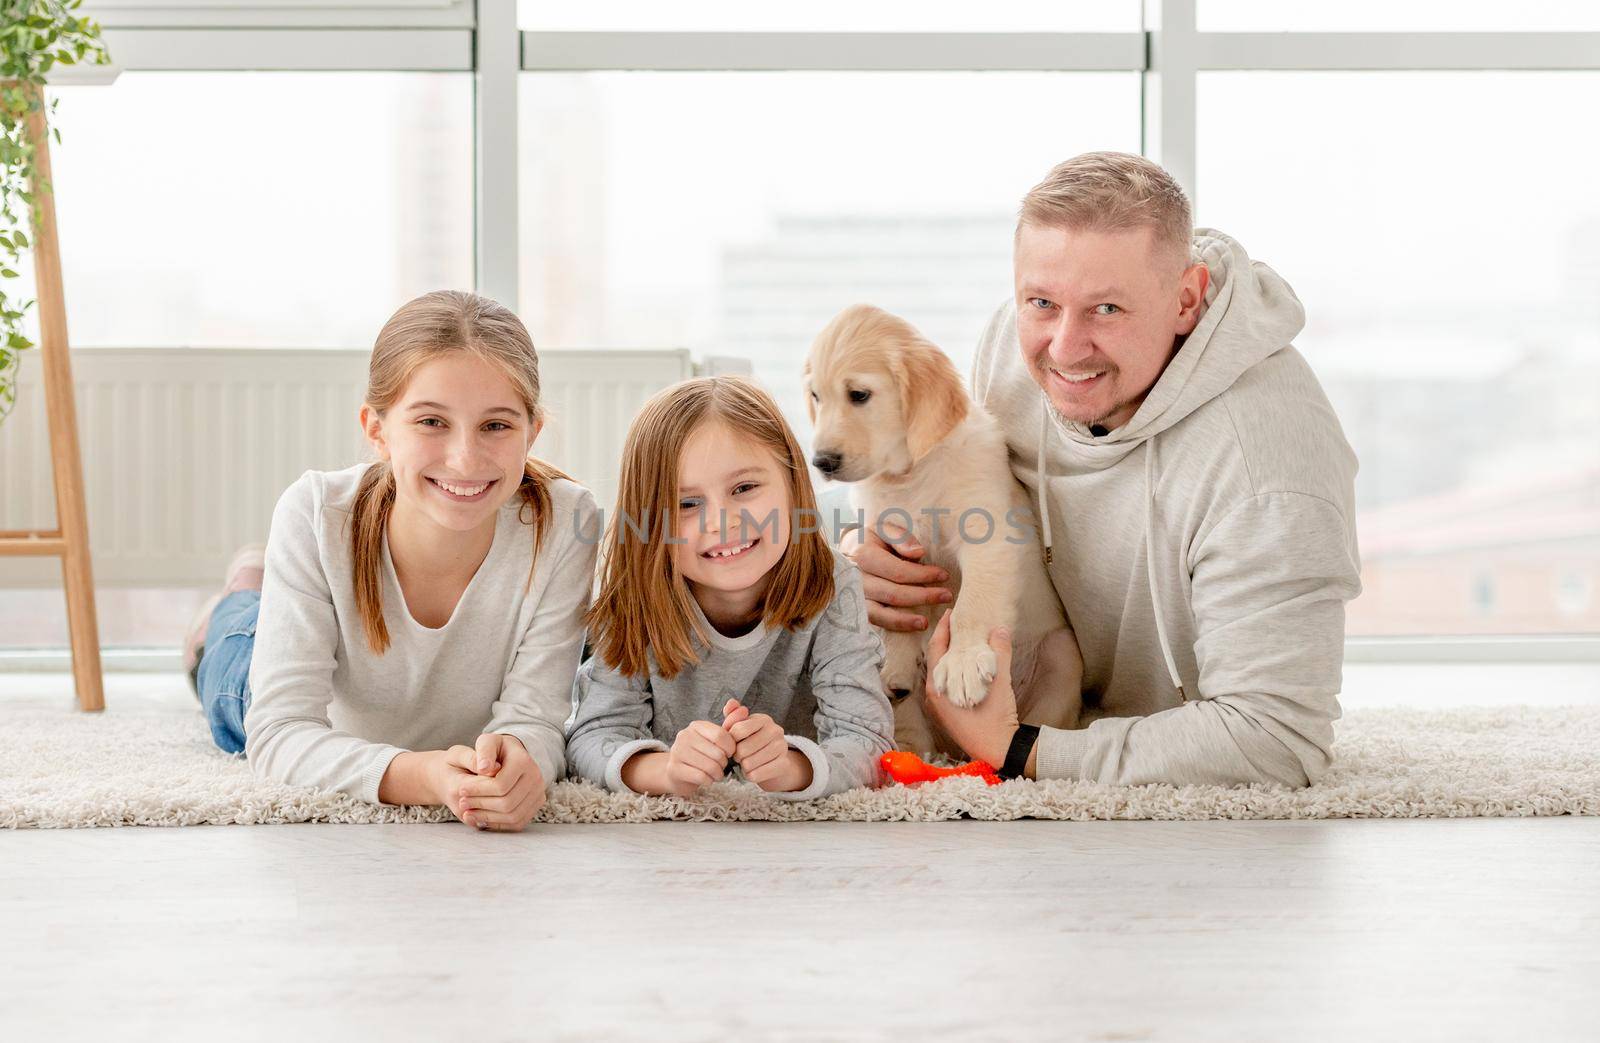 Father with daughters and puppy by tan4ikk1